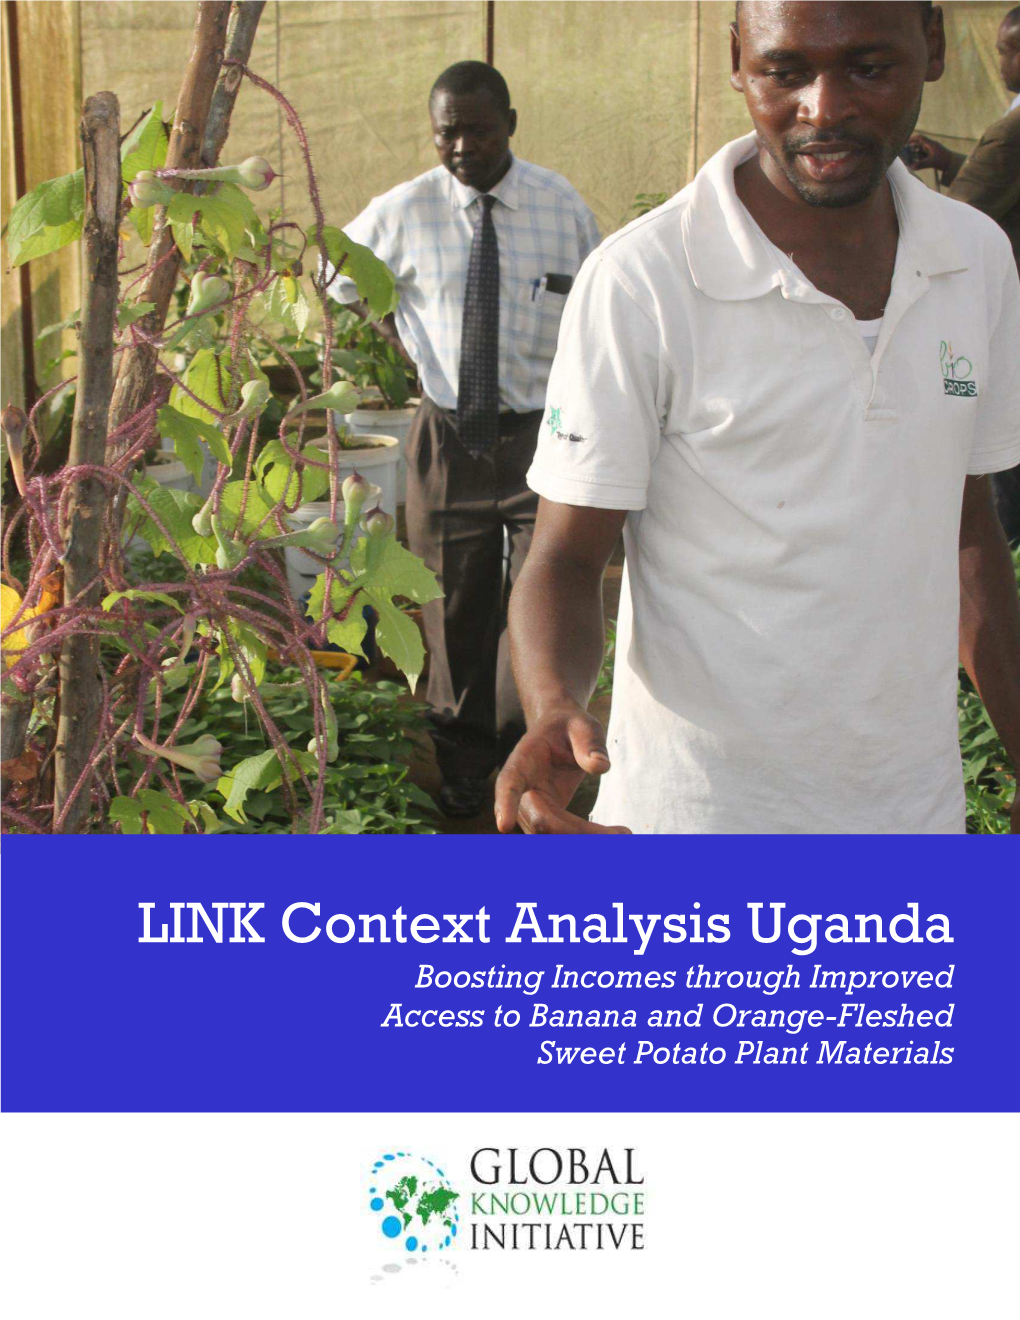 LINK Context Analysis Uganda Boosting Incomes Through Improved Access to Banana and Orange-Fleshed Sweet Potato Plant Materials